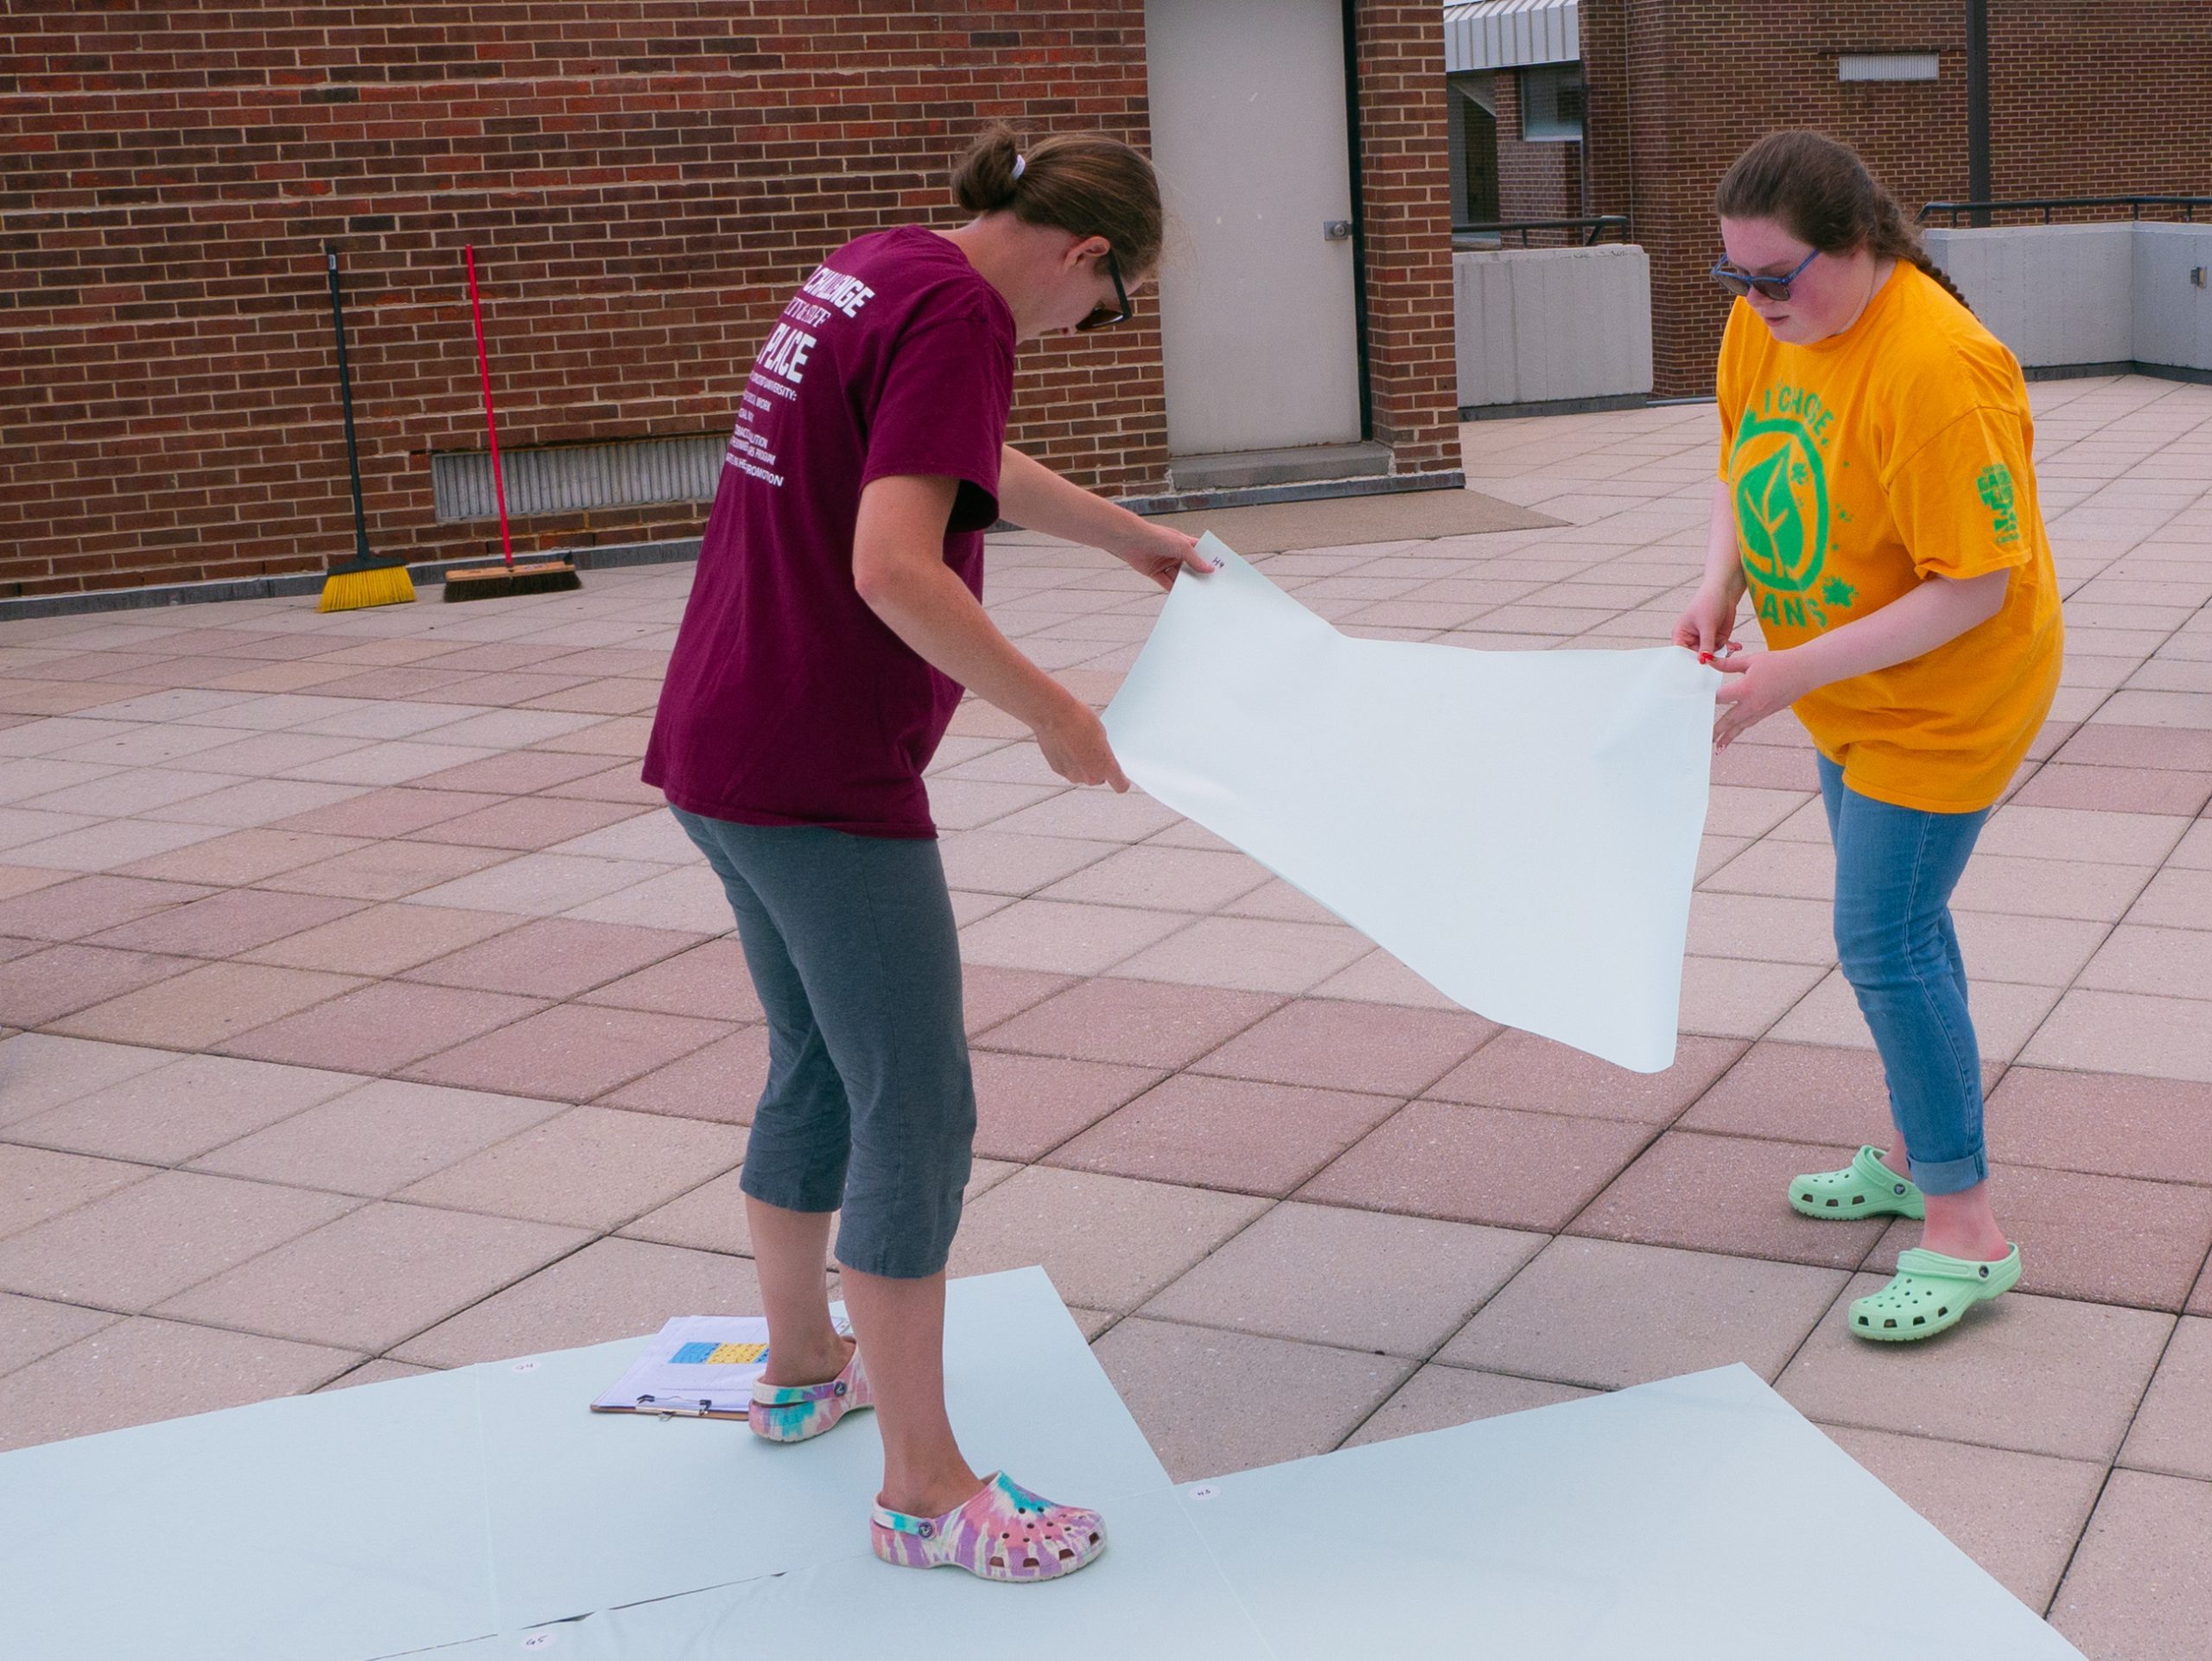 Concord University staff and students painting the labyrinth